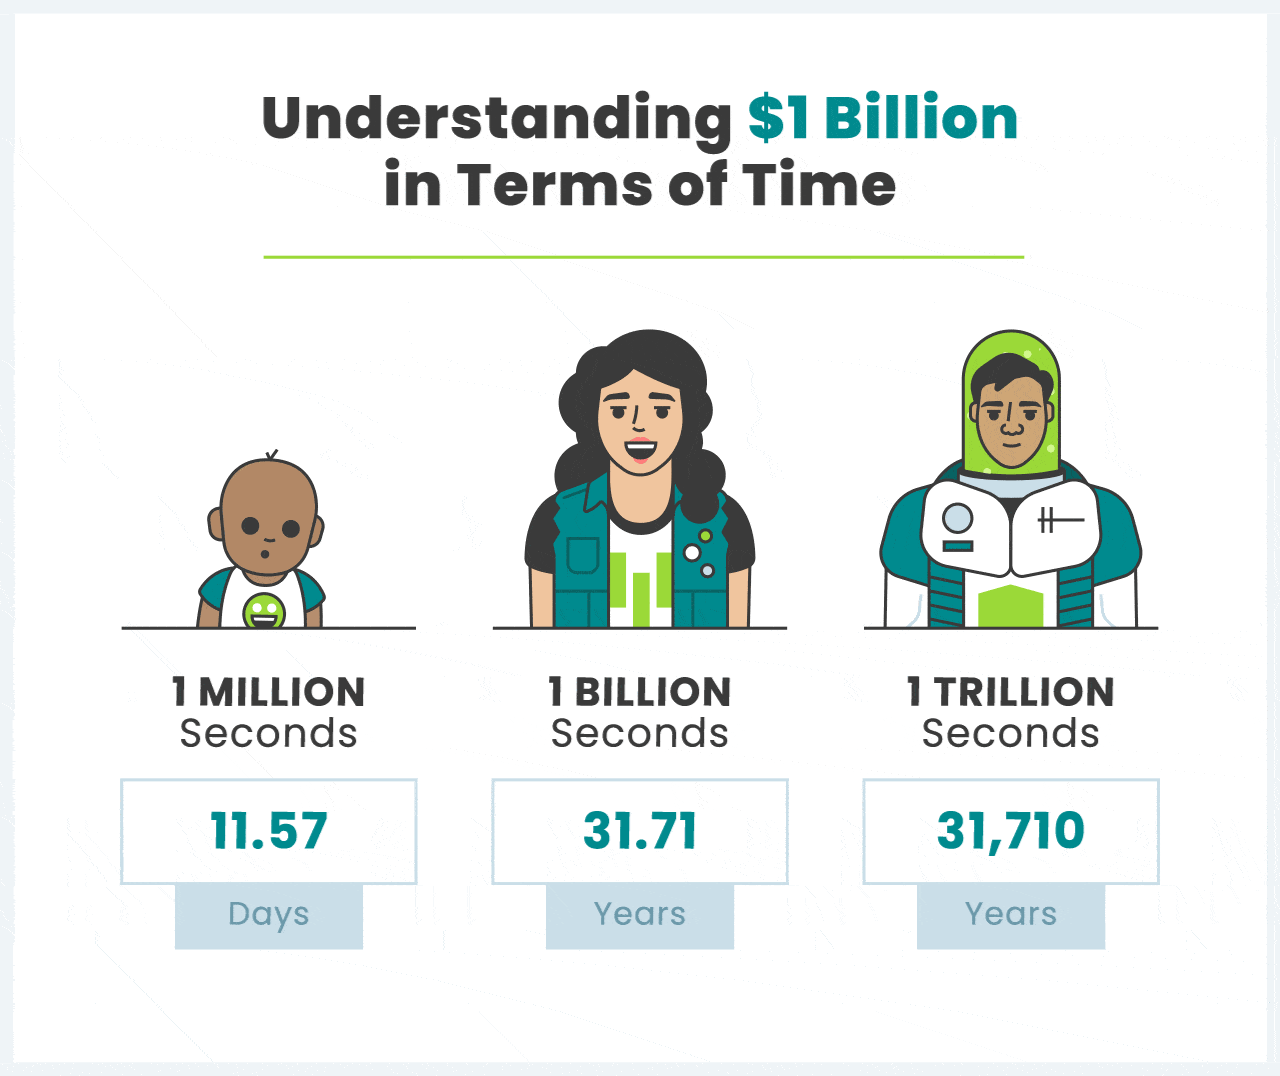 Understanding $1 Billion in Terms of Time